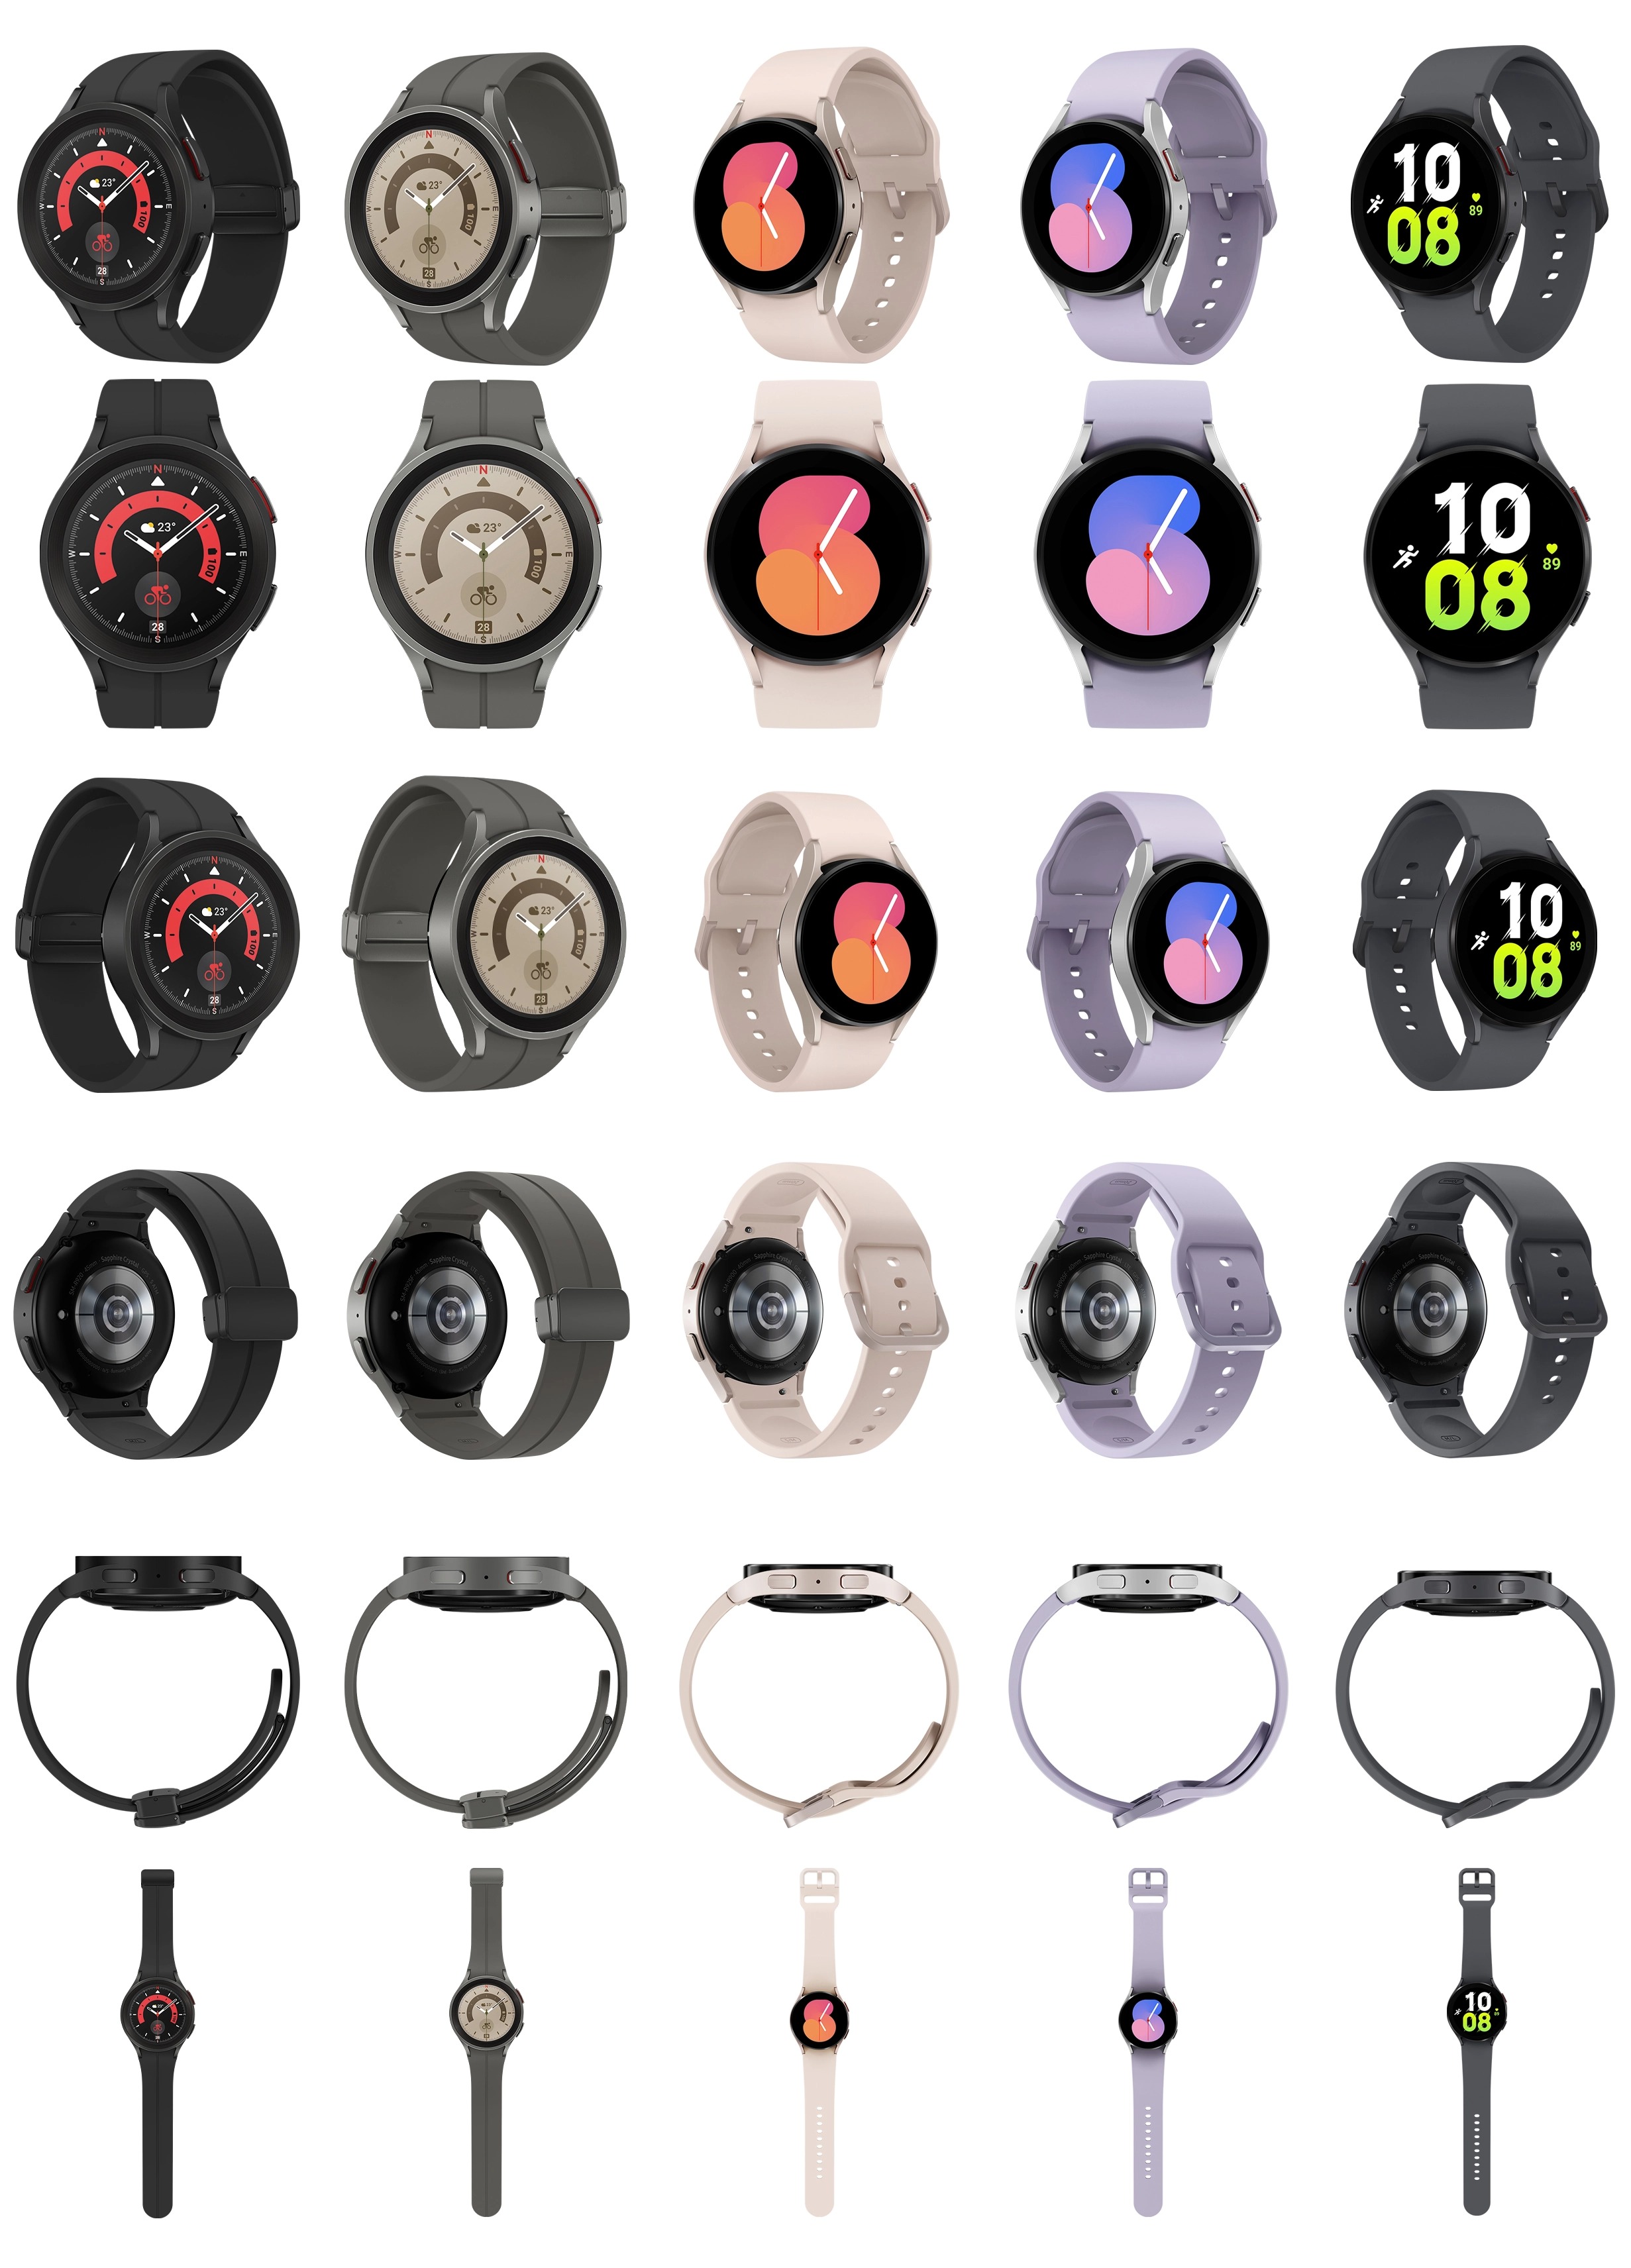 Samsung Galaxy Watch 5 and Watch 5 Pro leaked renders